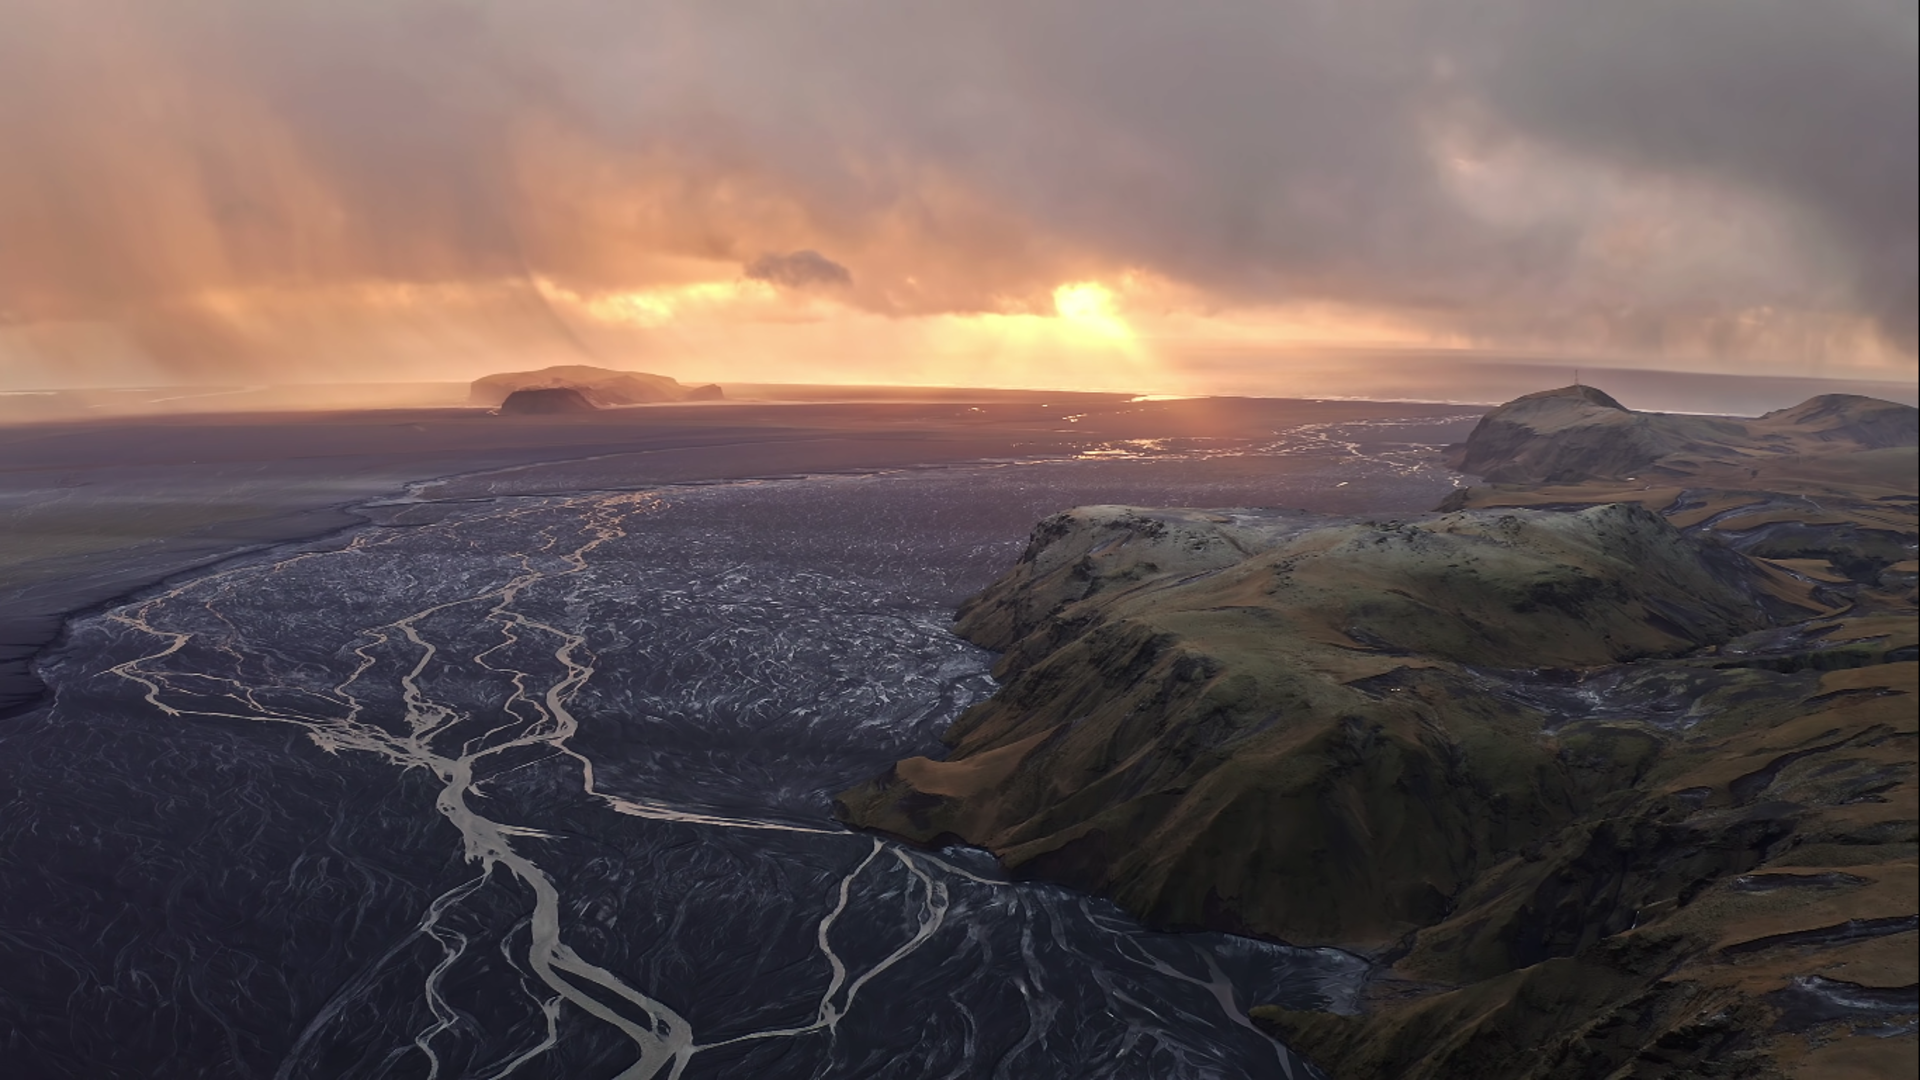 General 1920x1080 Iceland ocean view mountains Currents sunlight aerial view